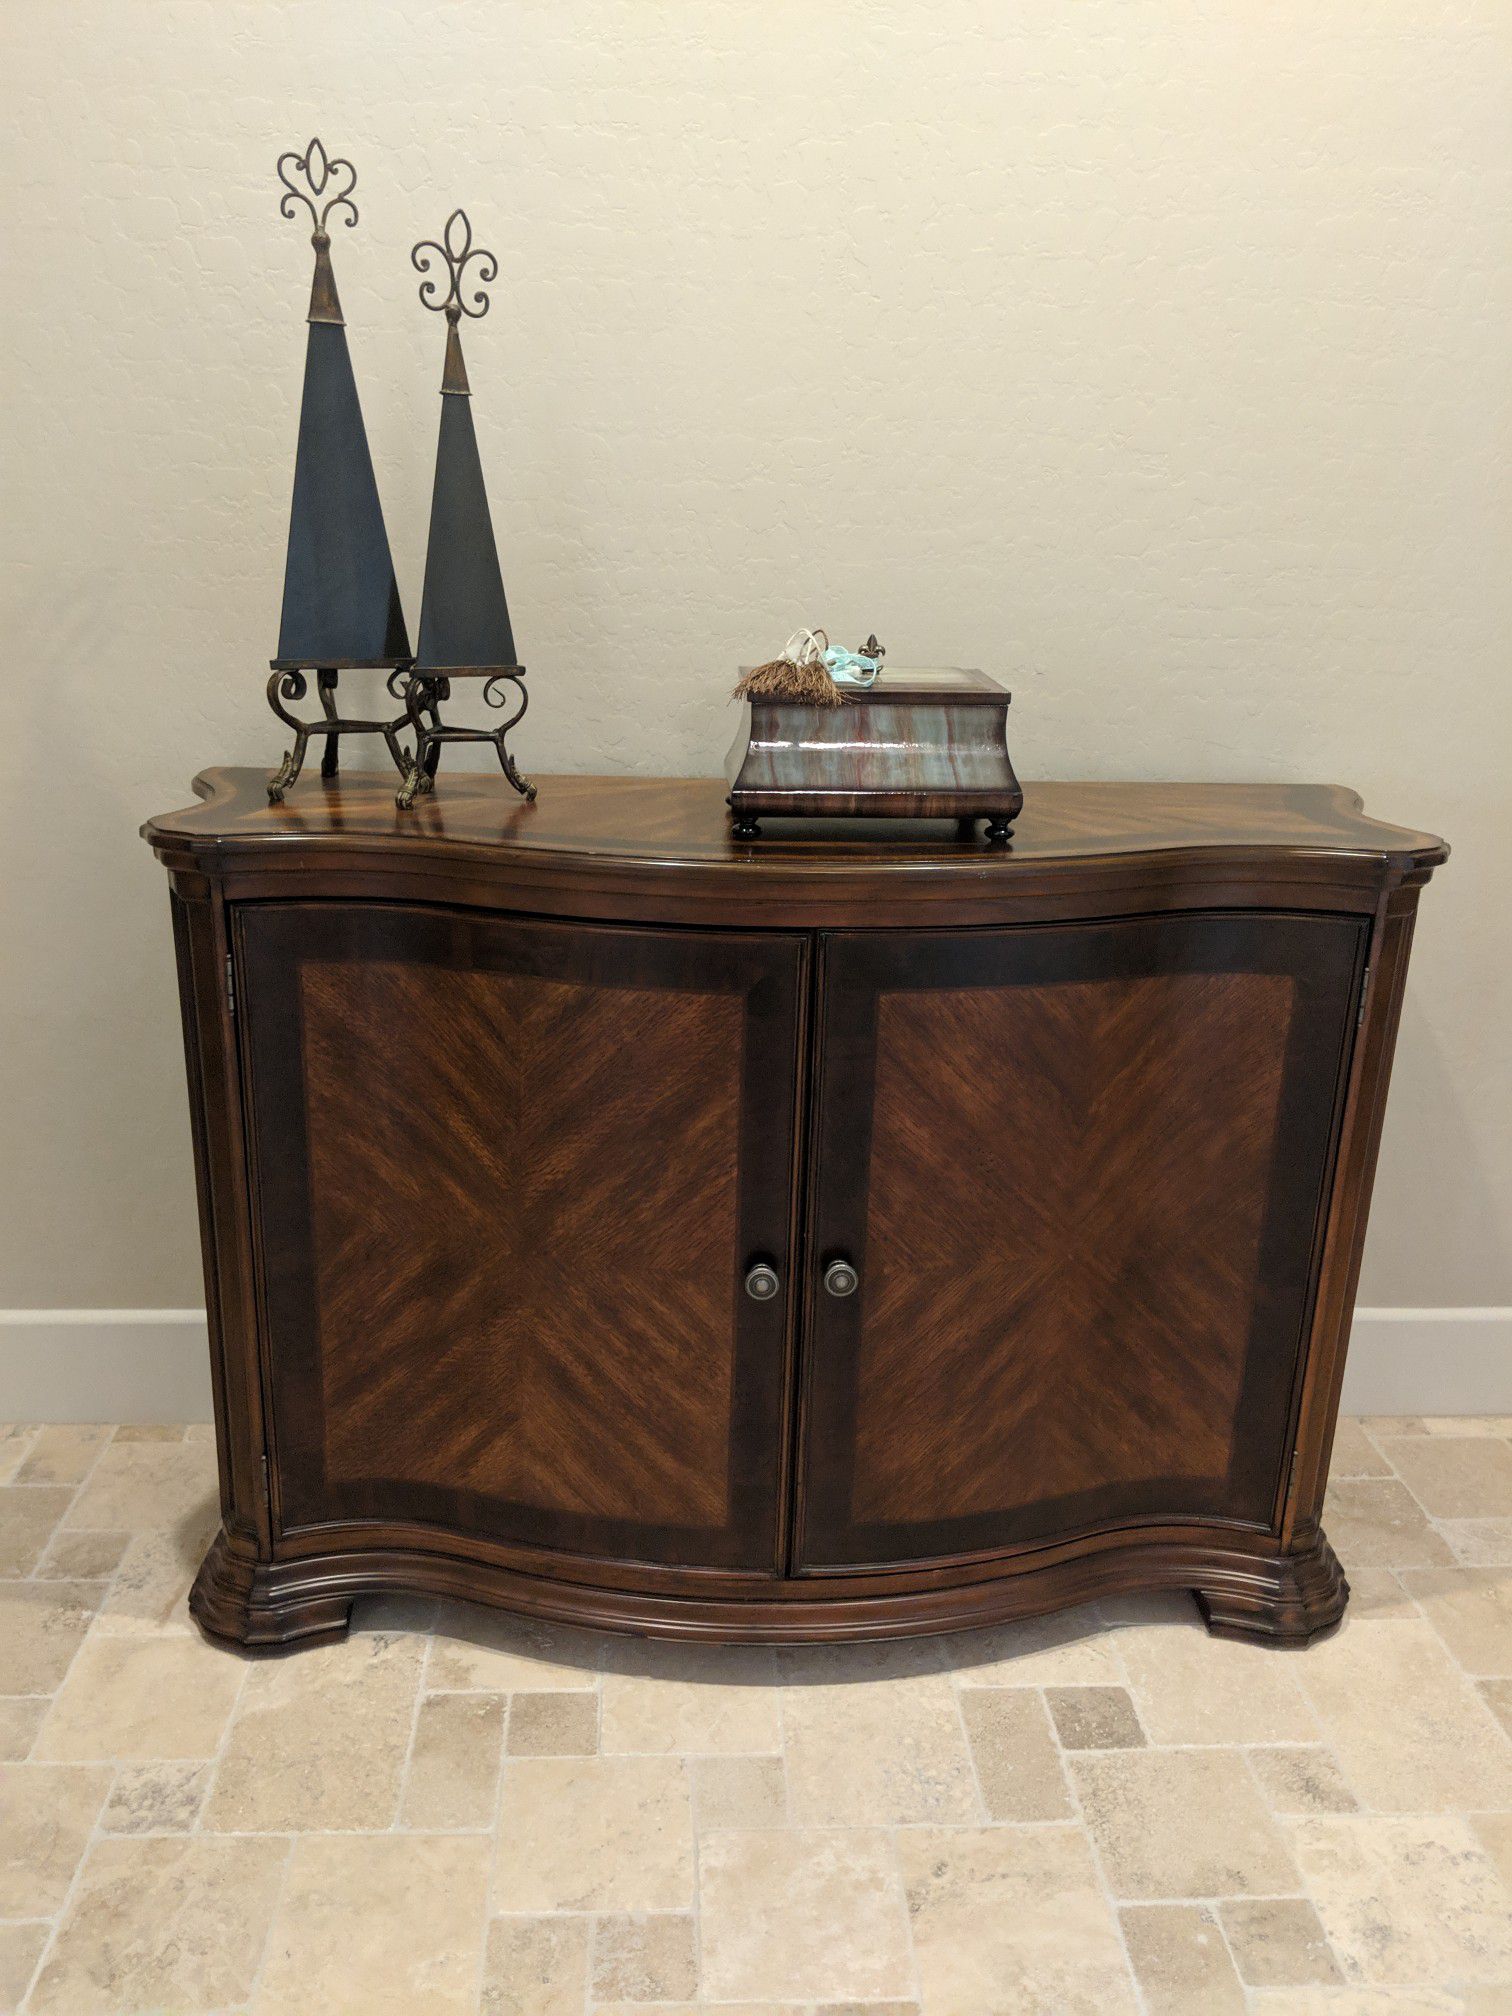 TV console or entry table $180